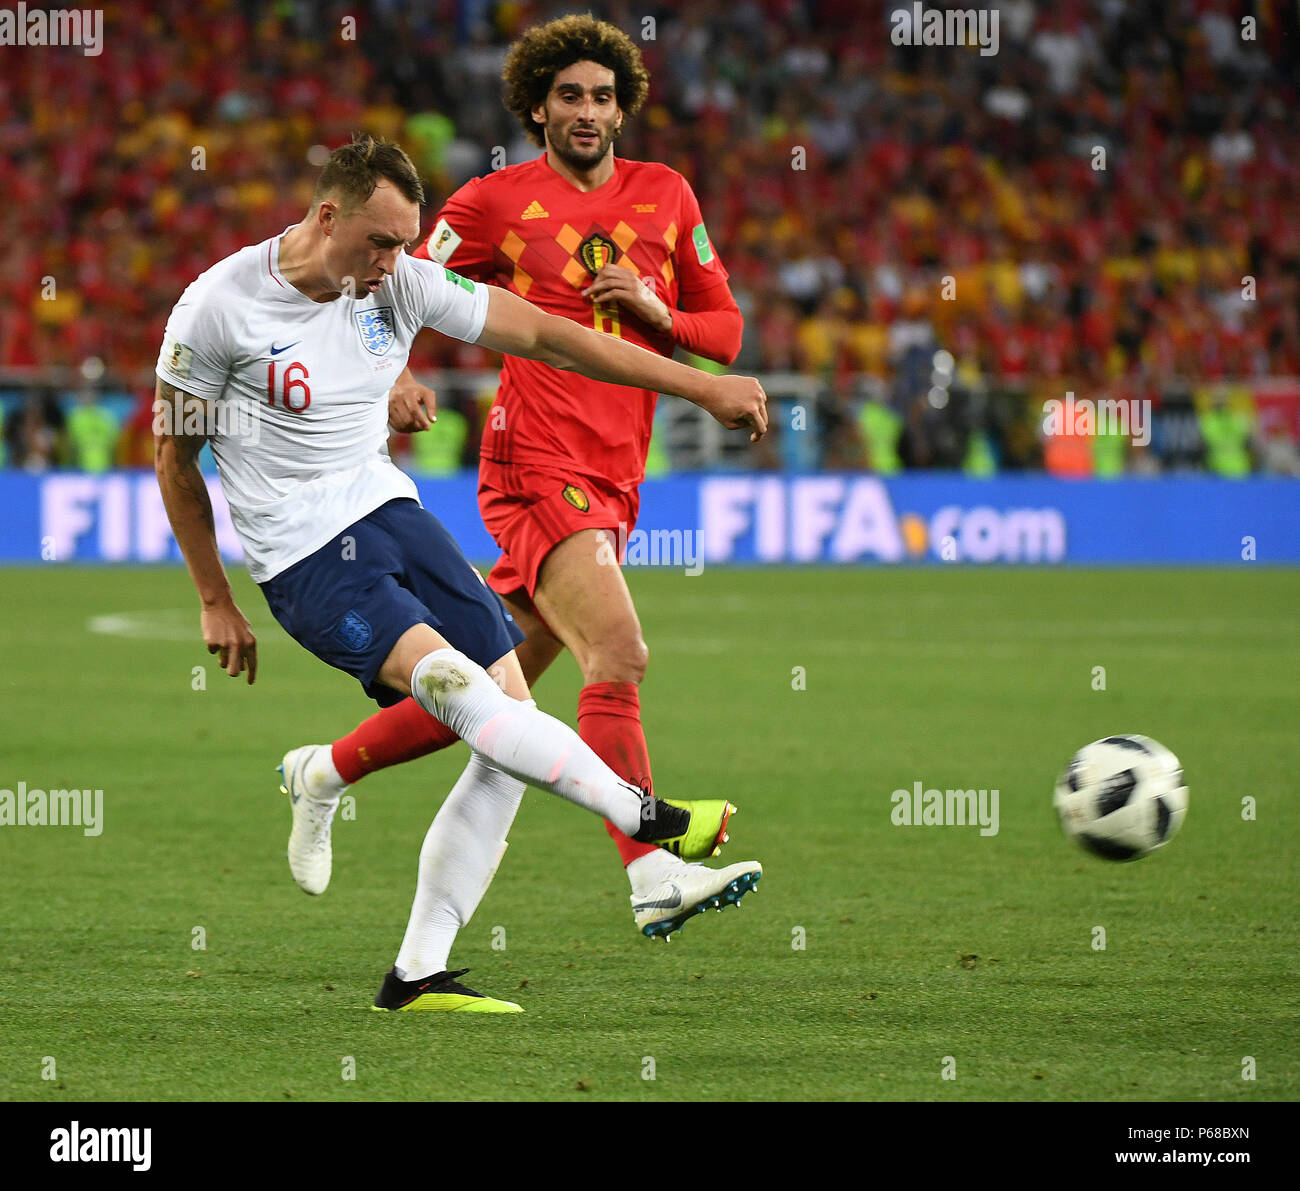 Kaliningrad, Russia. 28th June, 2018. Phil Jones (L) of England vies with Marouane Fellaini of Belgium during the 2018 FIFA World Cup Group G match between England and Belgium in Kaliningrad, Russia, June 28, 2018. Credit: Du Yu/Xinhua/Alamy Live News Stock Photo